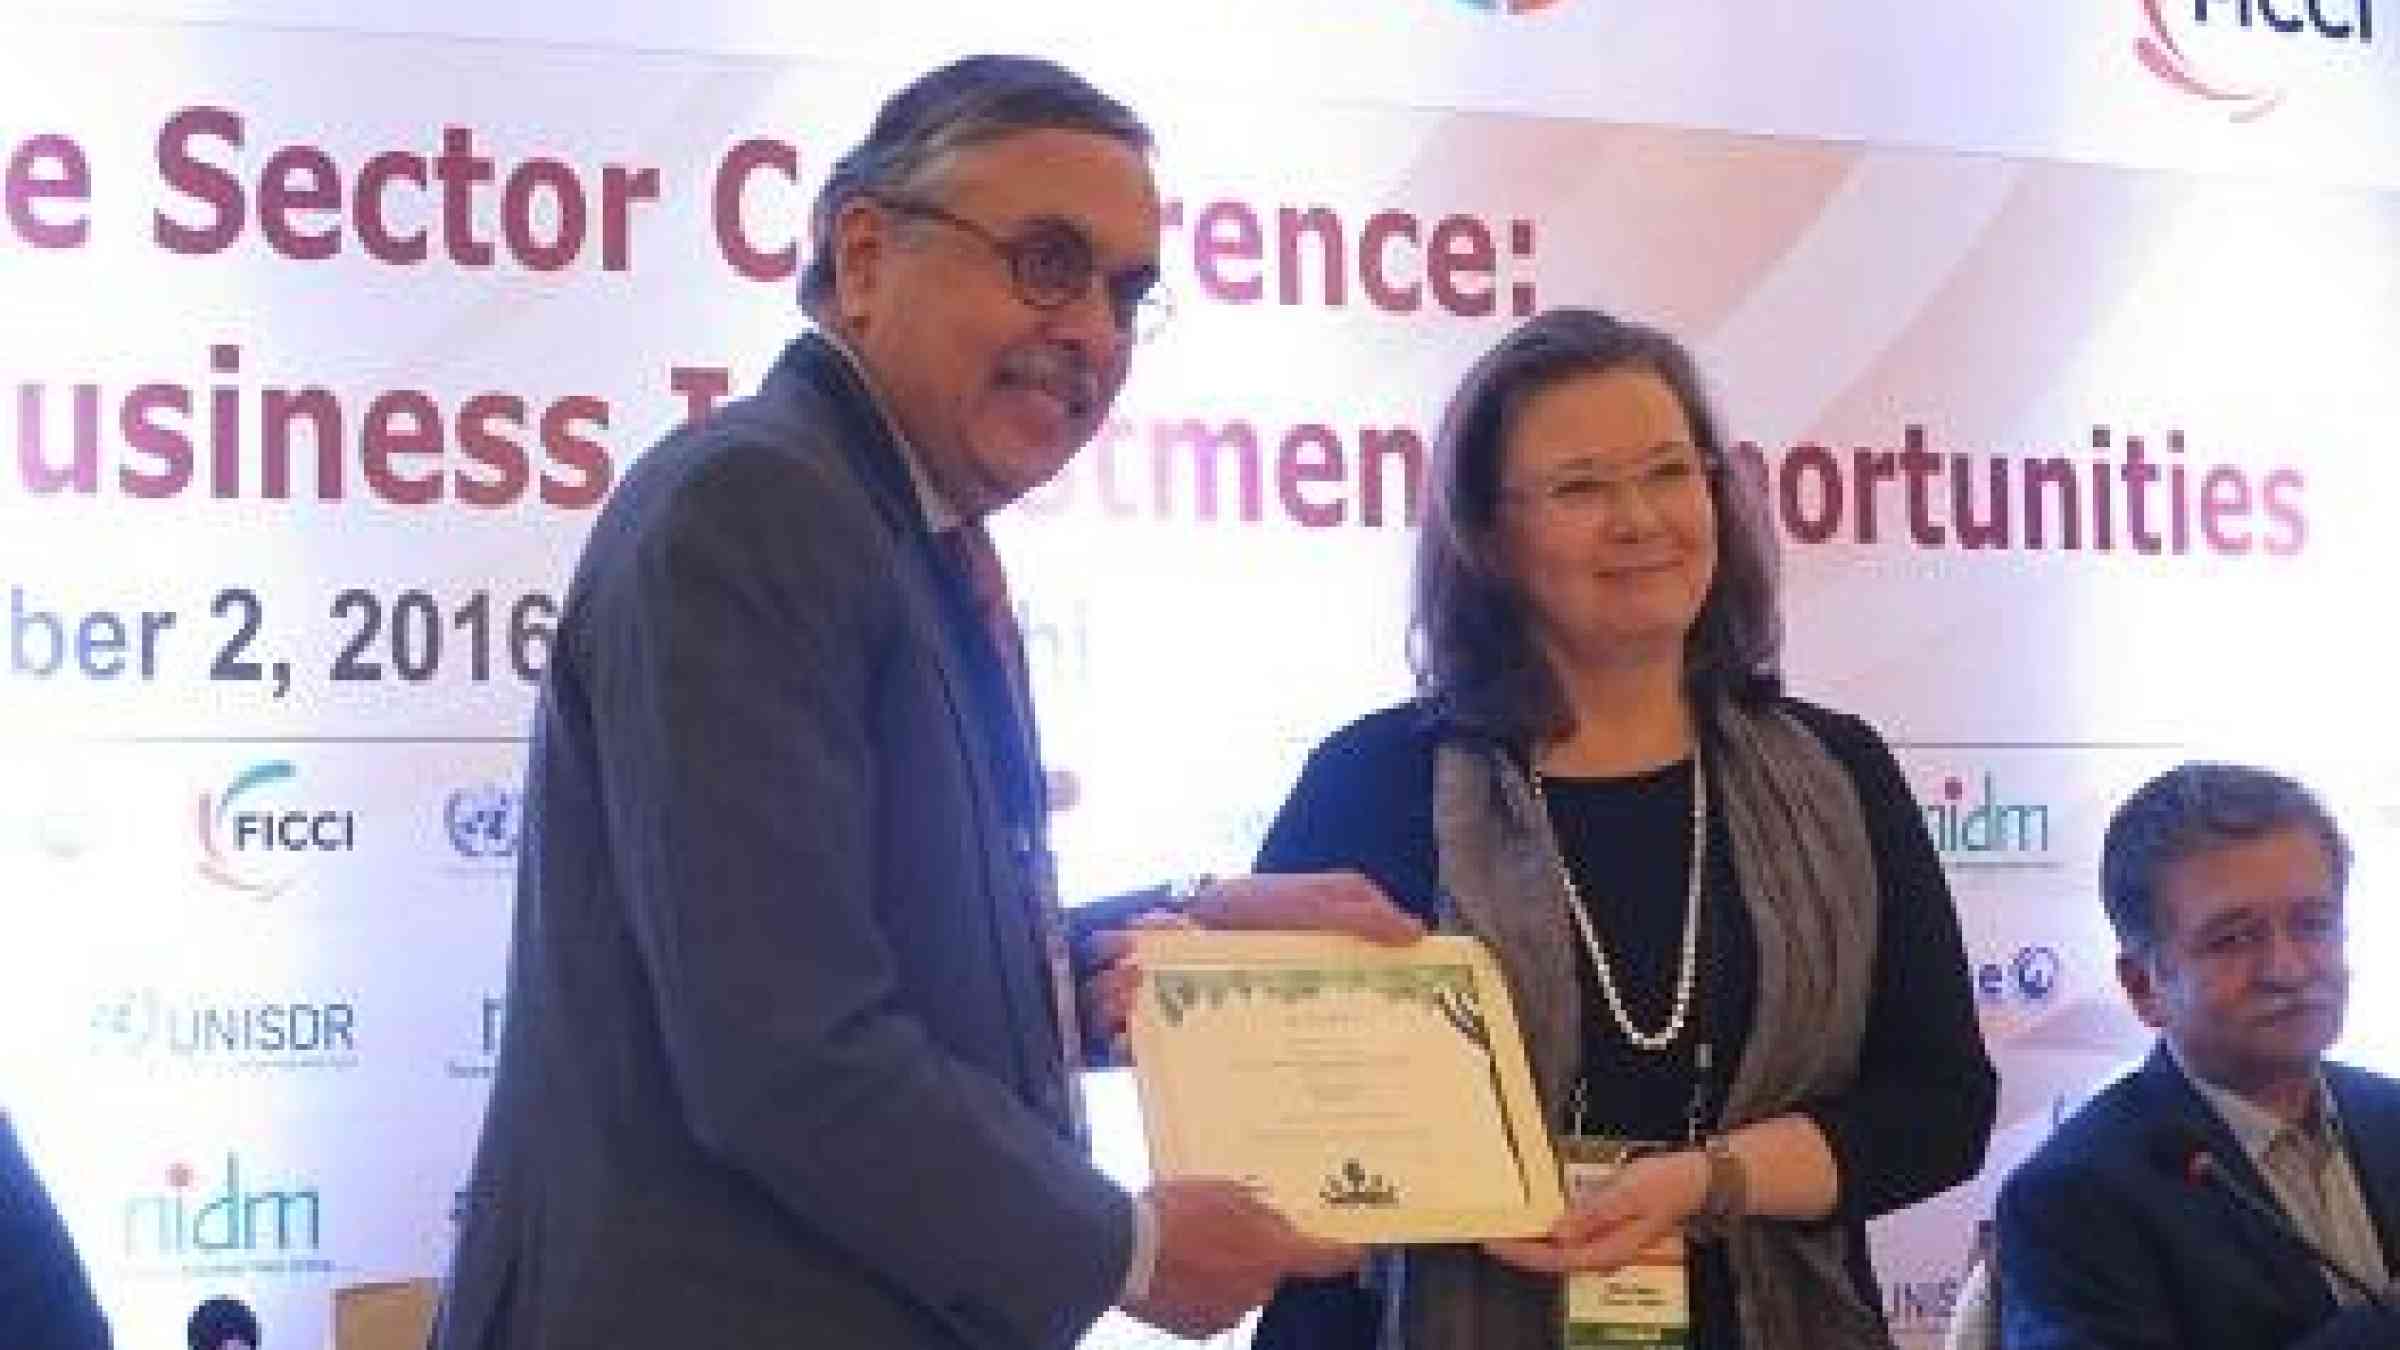 The Secretary-General of the Federation of Indian Chambers of Commerce and Industry, Dr. A. Didar Singh, with UNISDR Director Ms. Kirsi Madi (Photo: UNISDR)